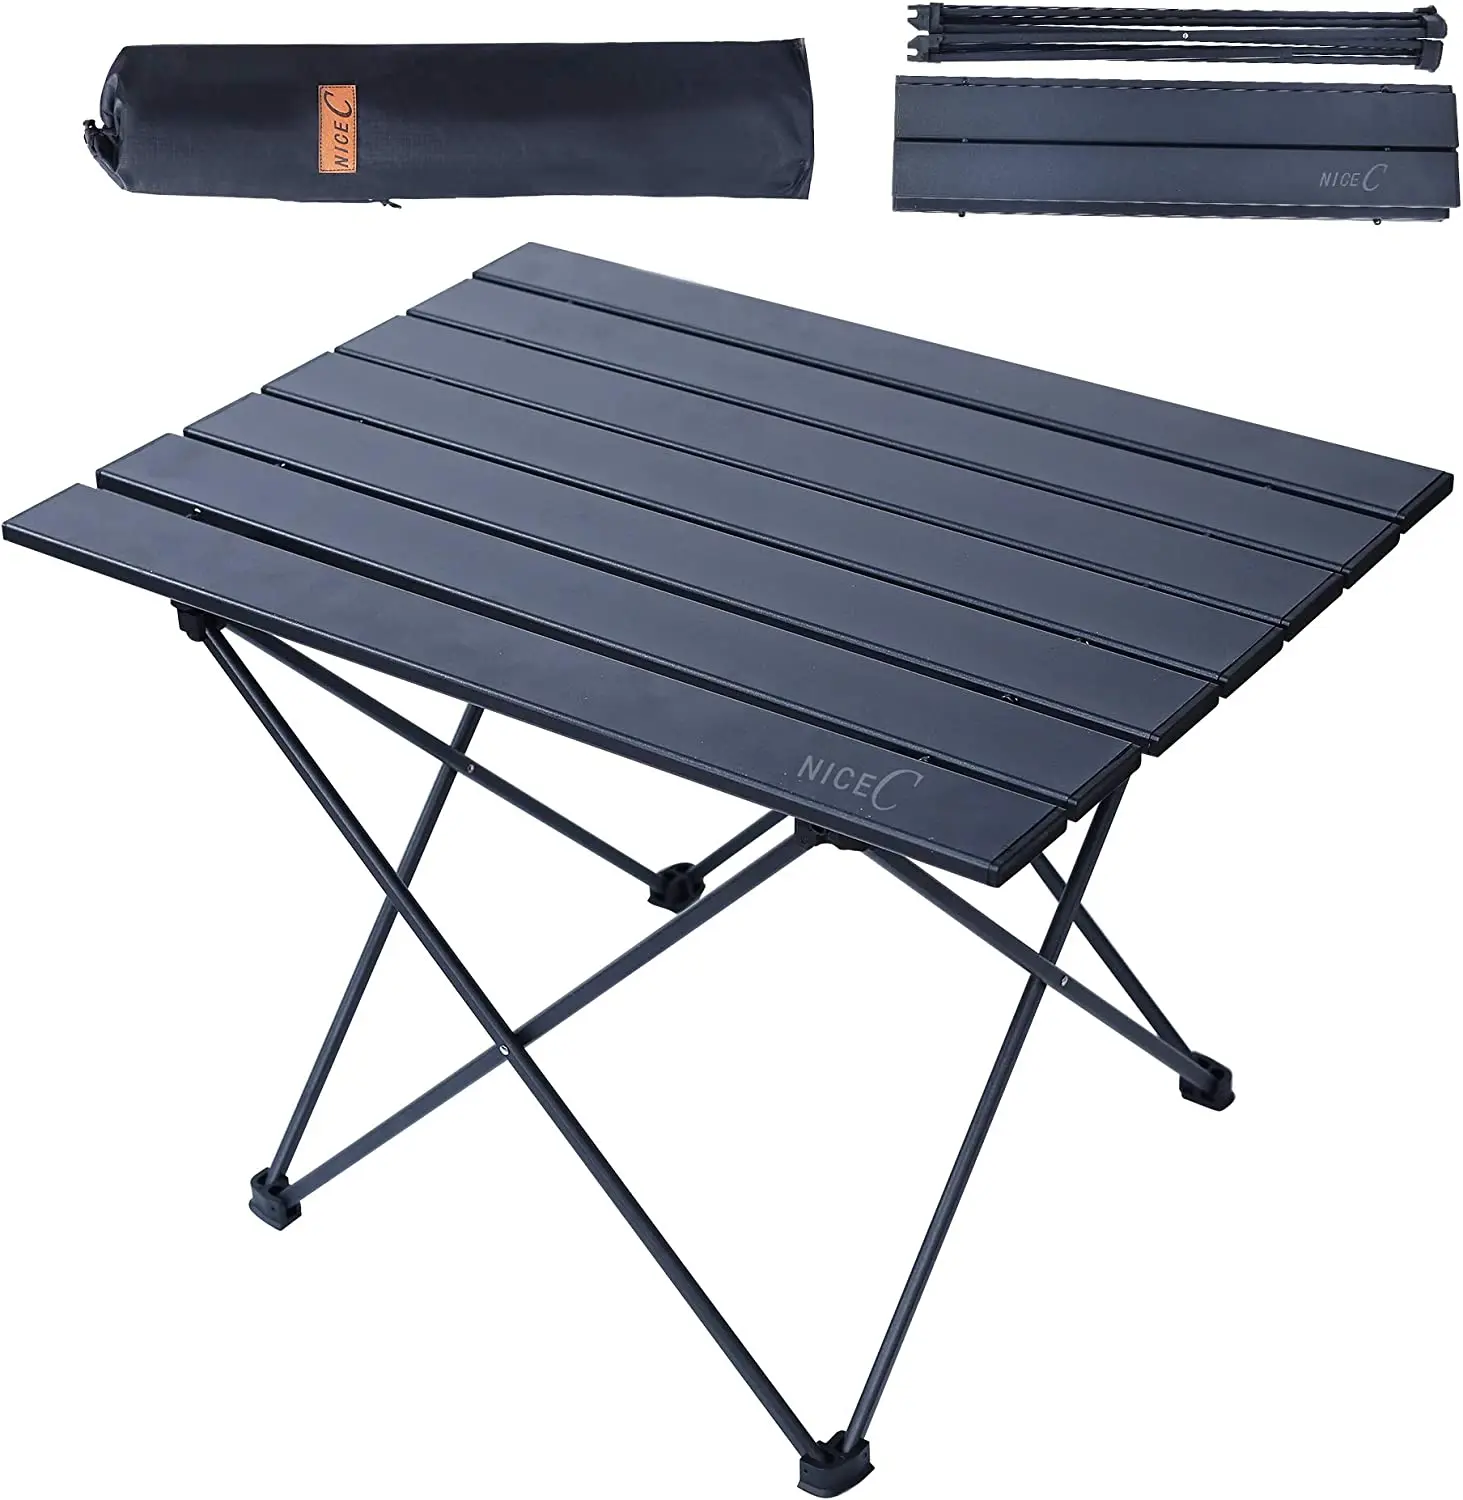 Formwell Outdoor Camping Table, Pliant Portable, Camp Folding